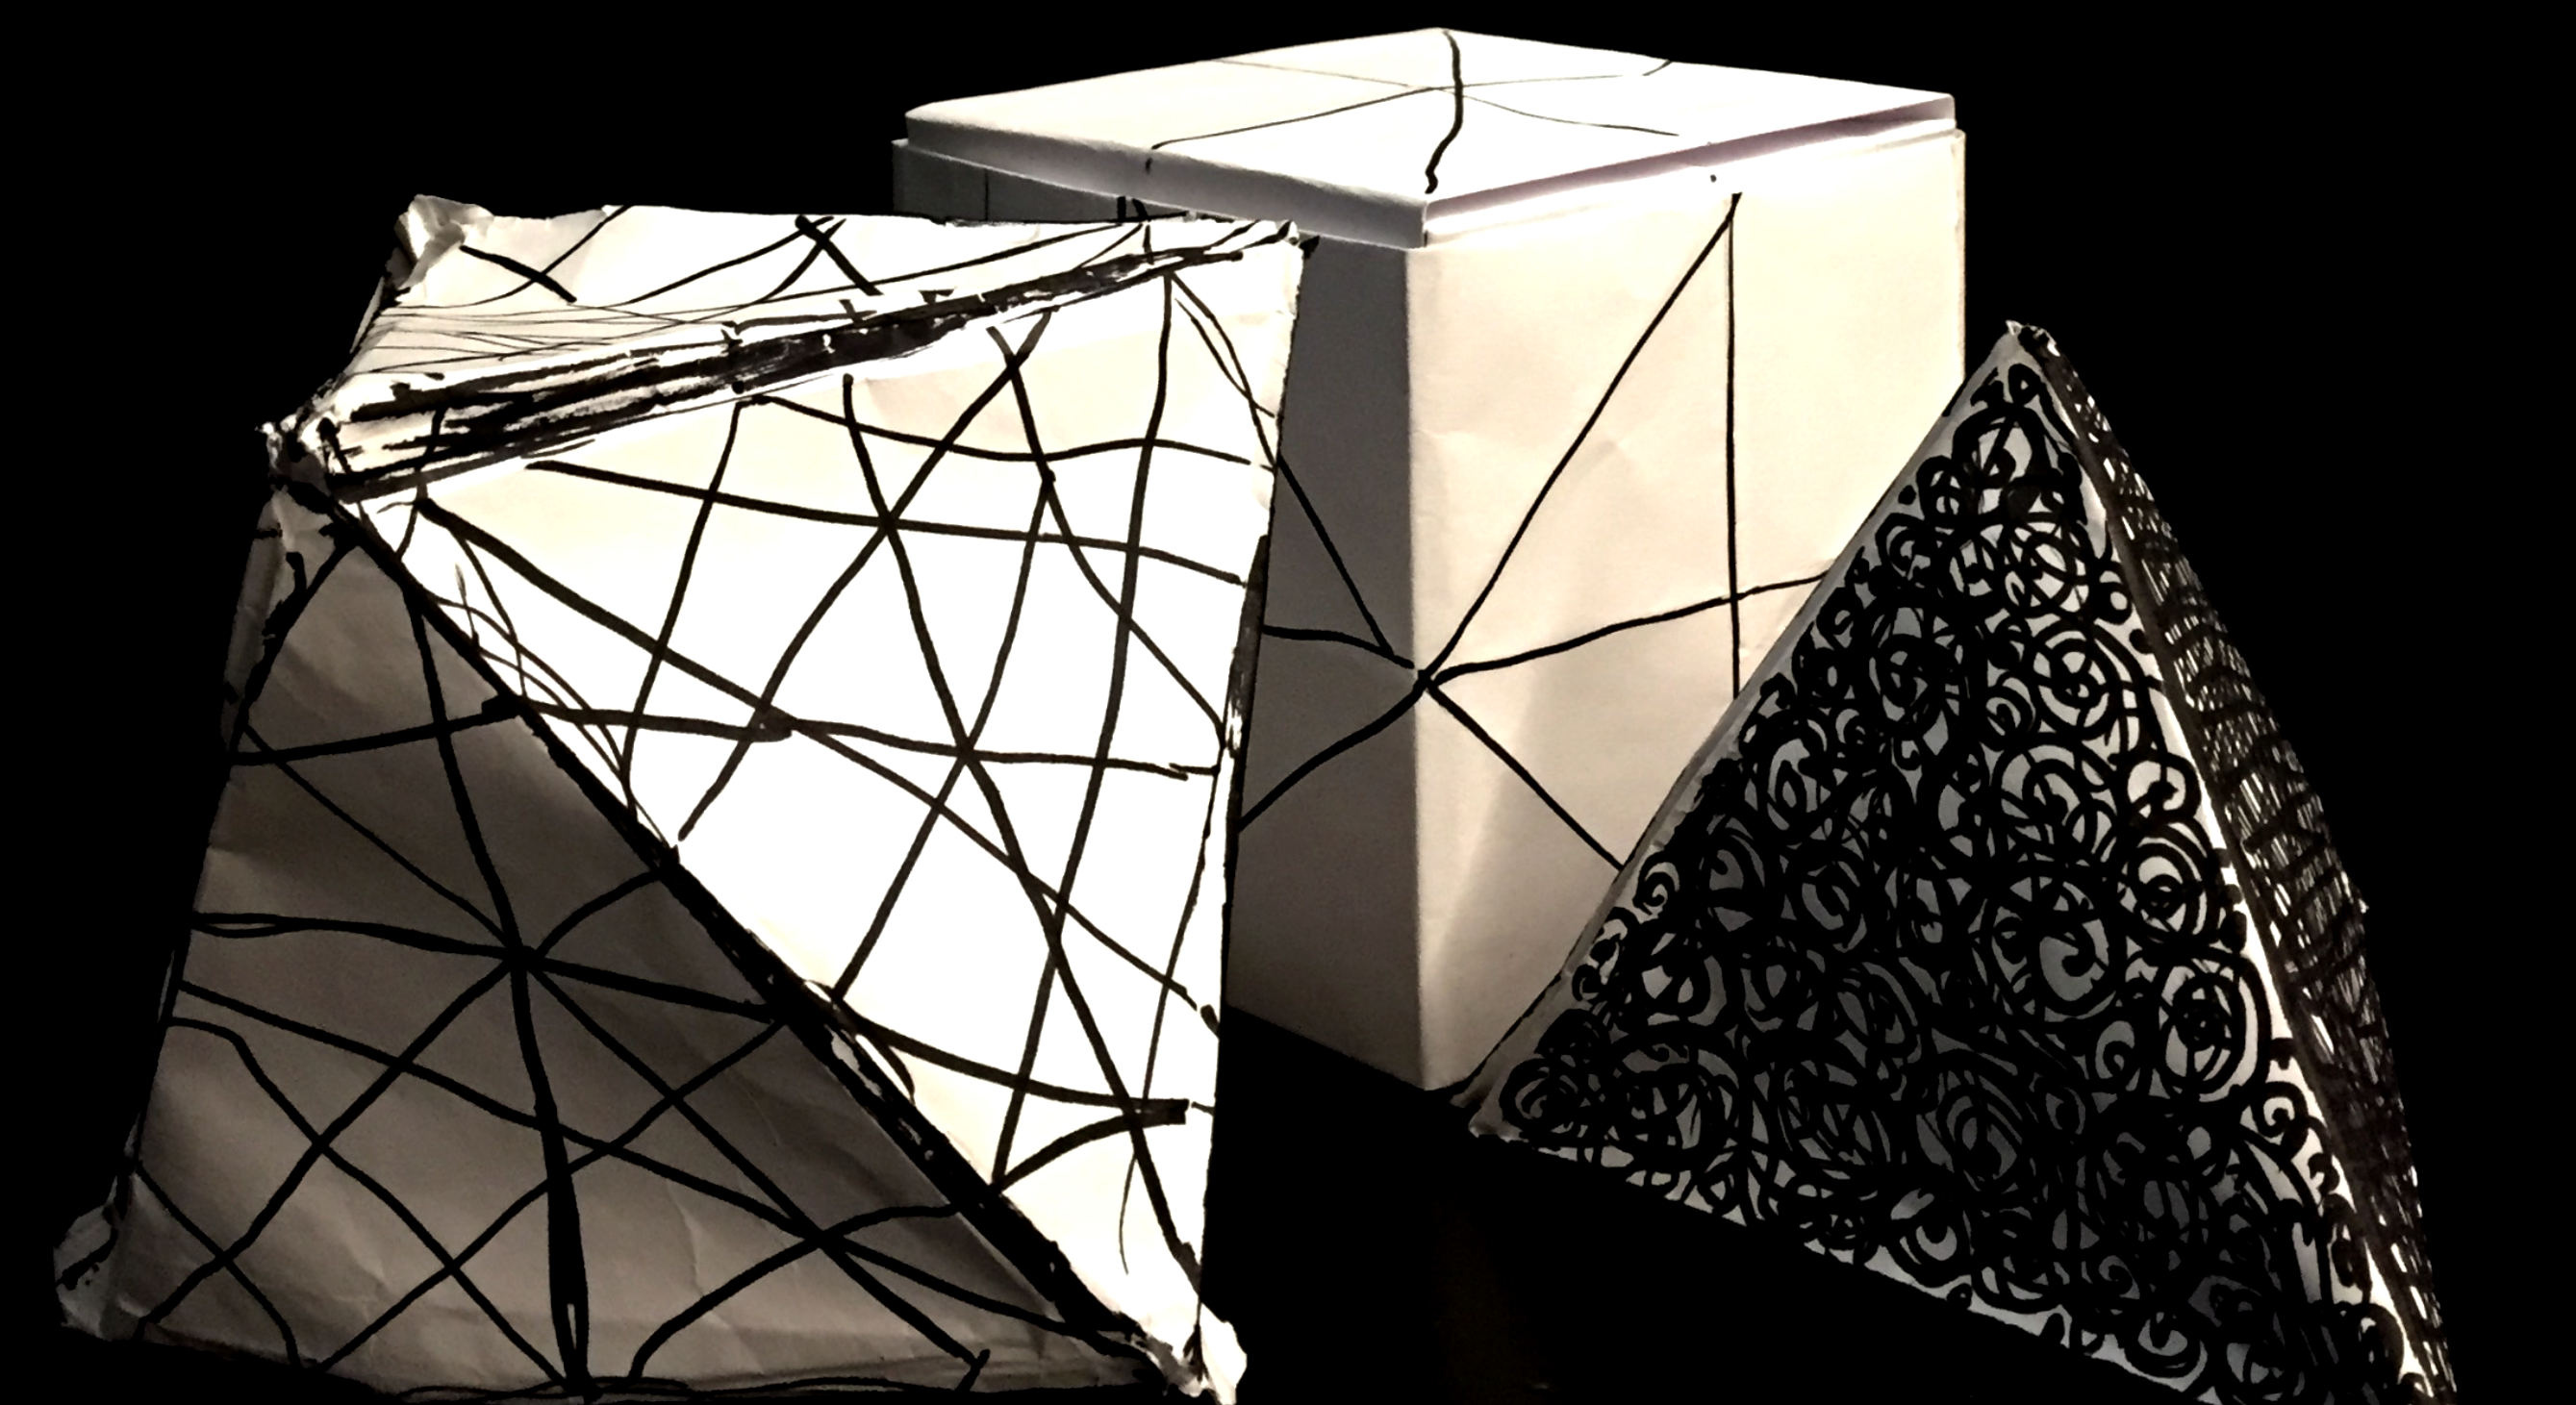 The Platonic Solids of Origami